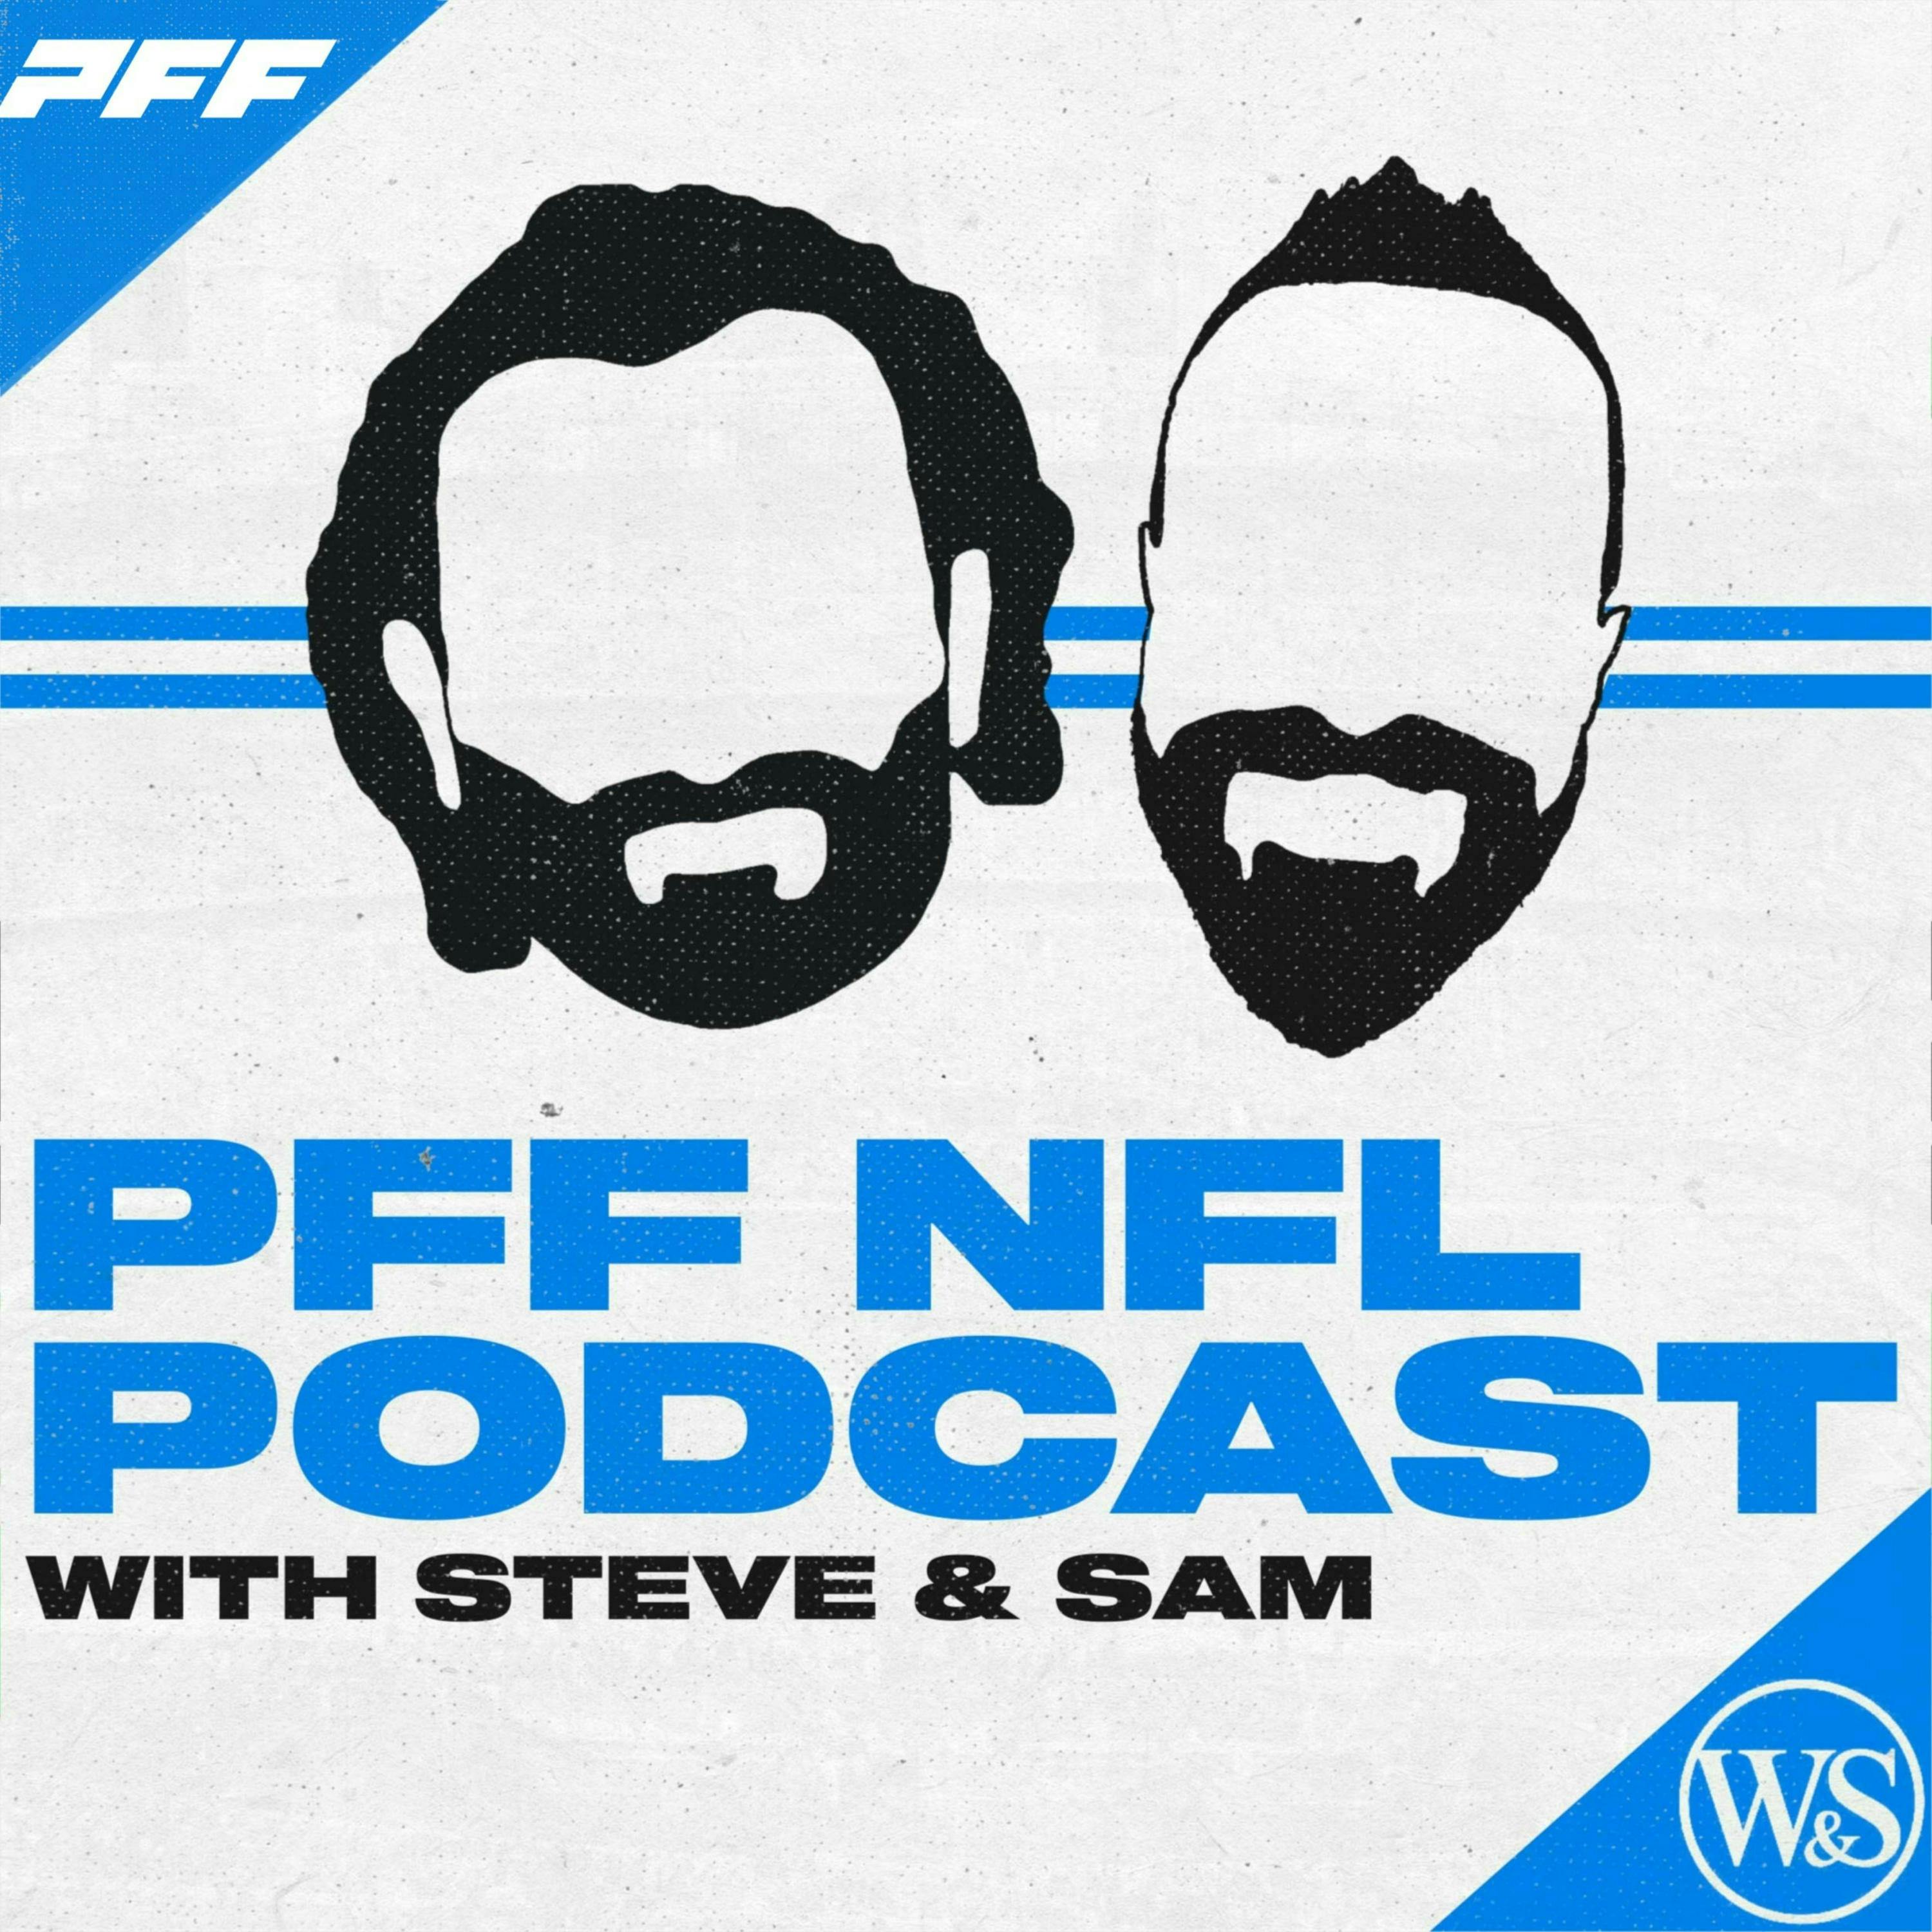 Eagles choke, Heinicke gets the W, lose-lose trades and Nick Wright talks ball